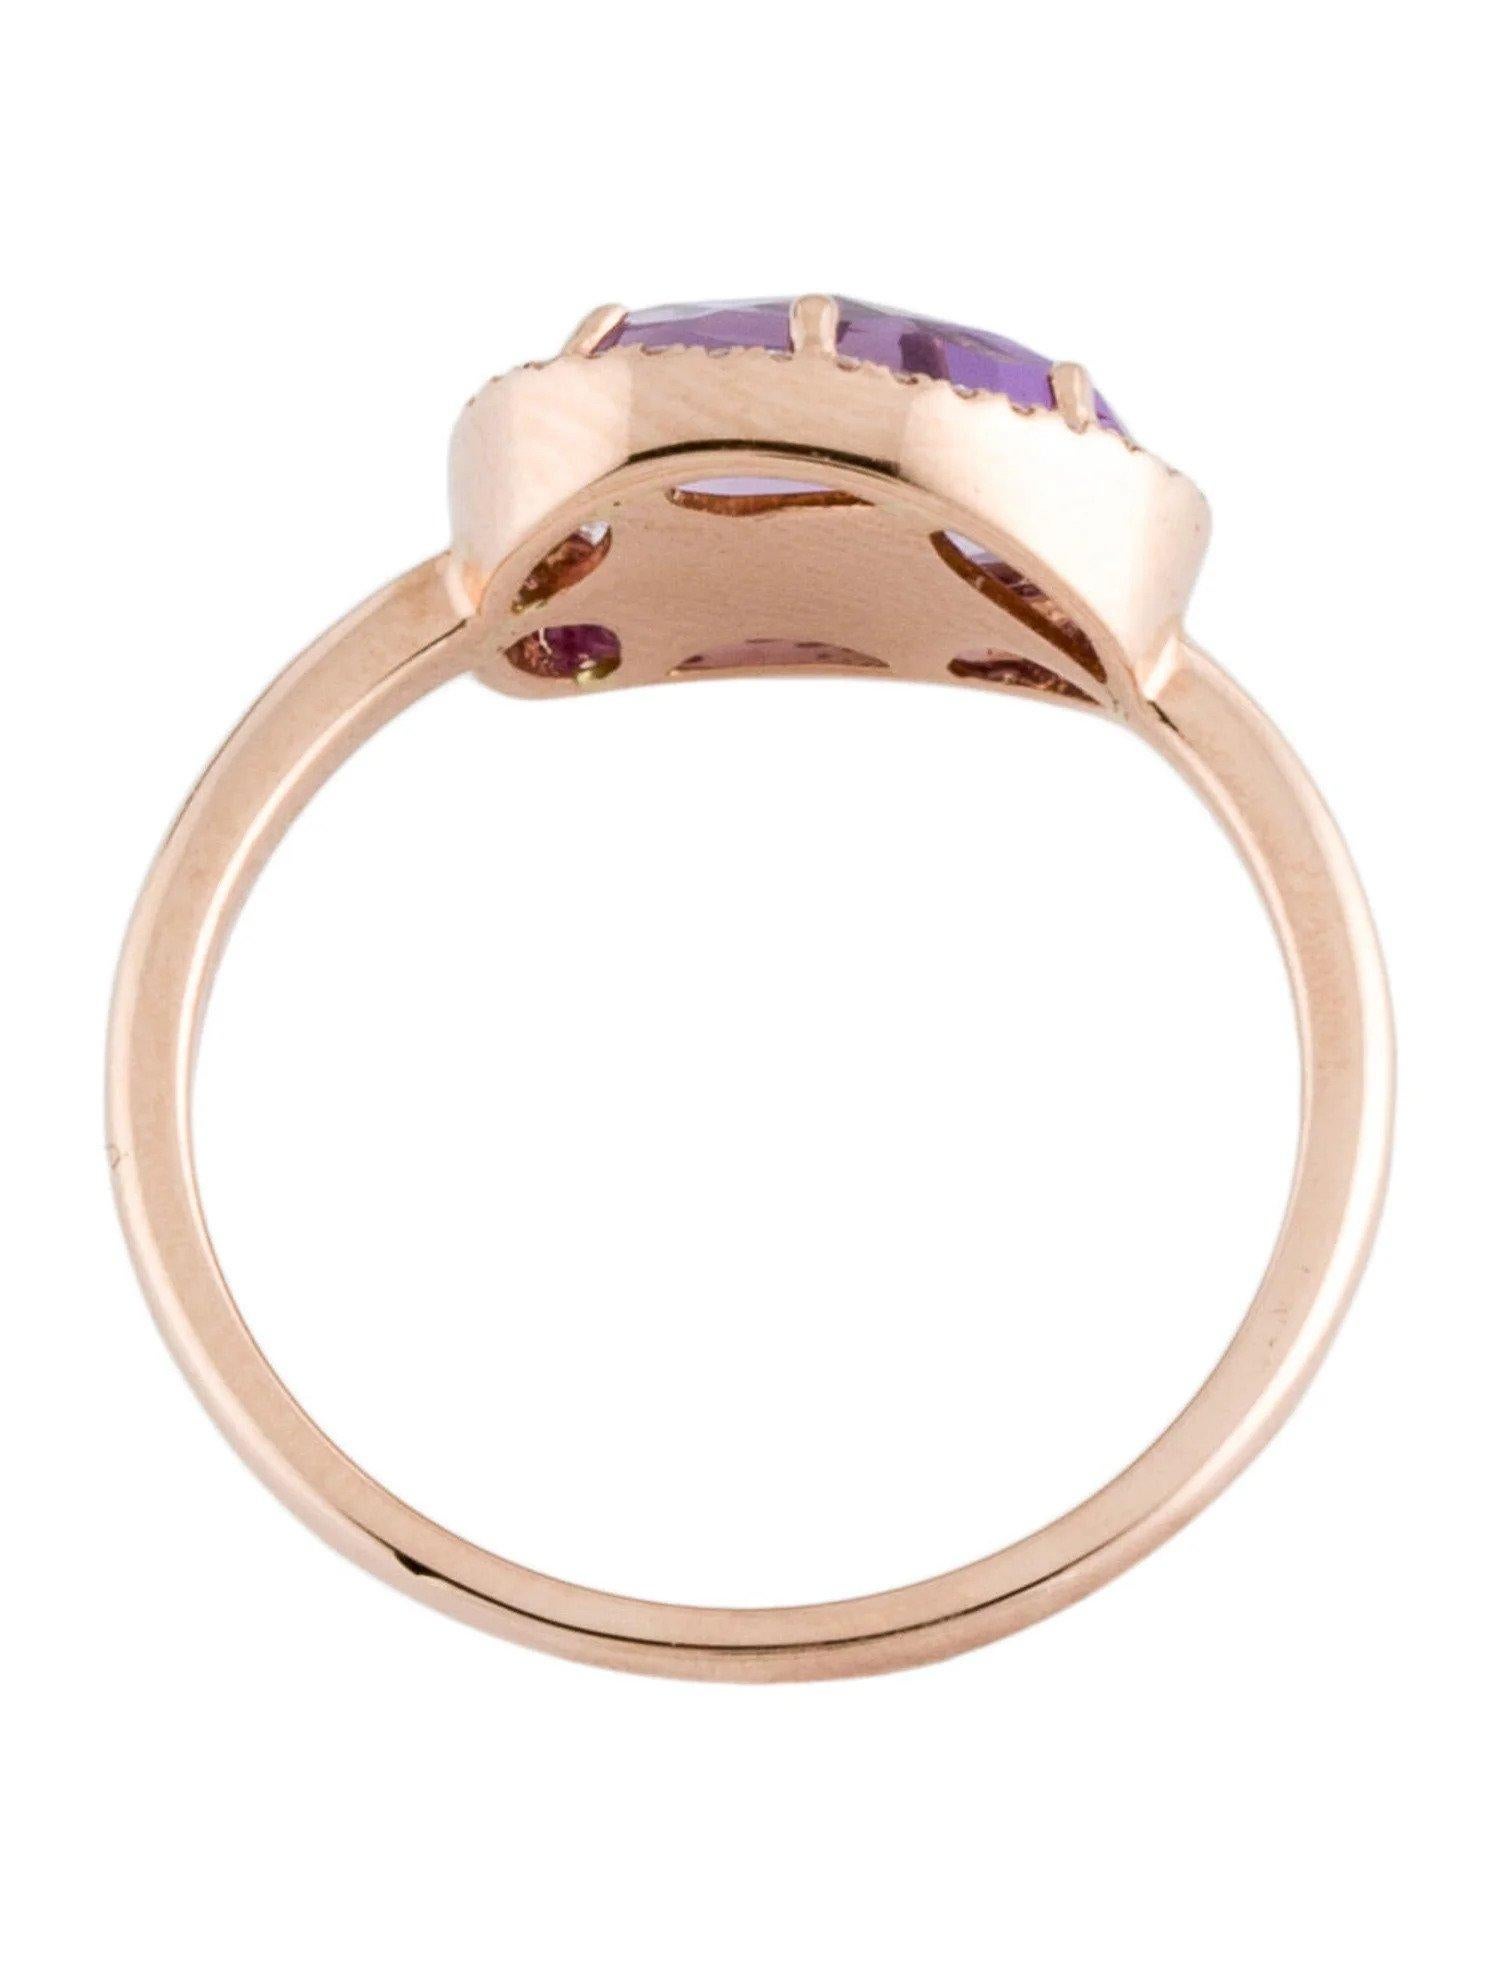 1.97 Carat Amethyst & Diamond Rose Gold Ring In New Condition For Sale In Great Neck, NY